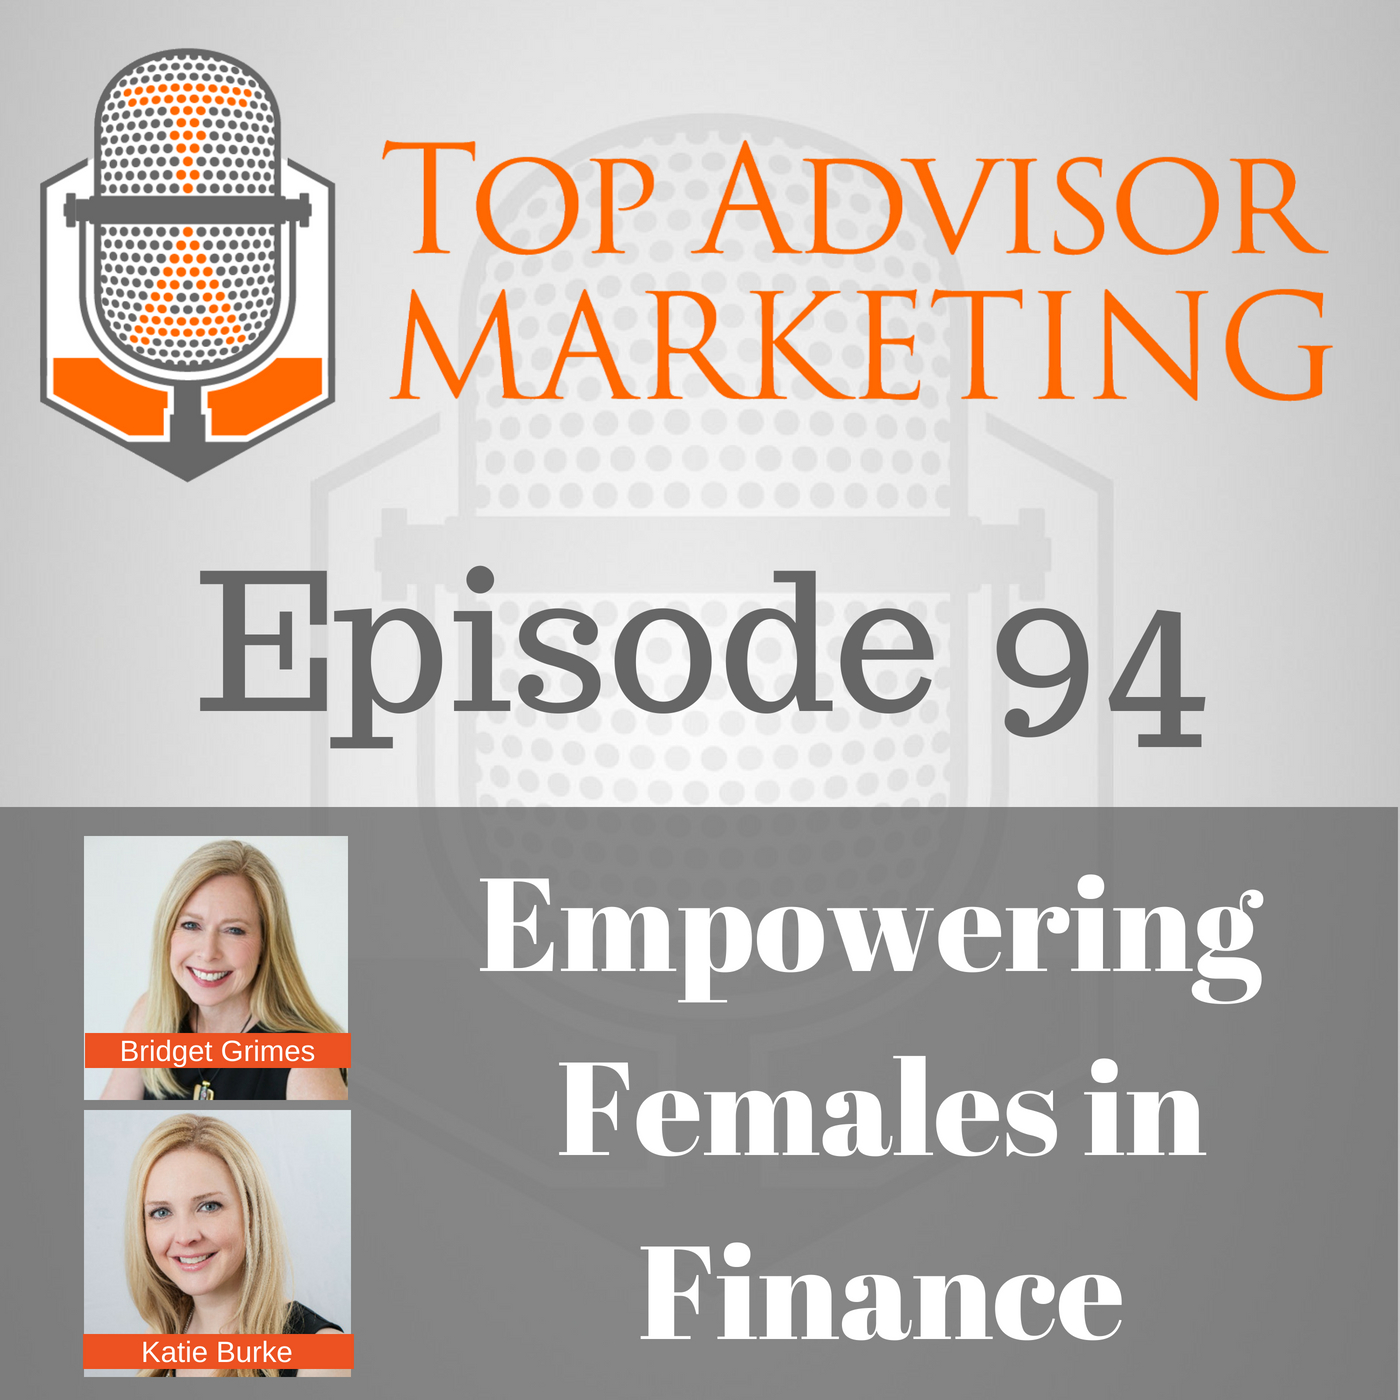 Episode 94 - Empowering Females in Finance with Katie Burke and Bridget Grimes